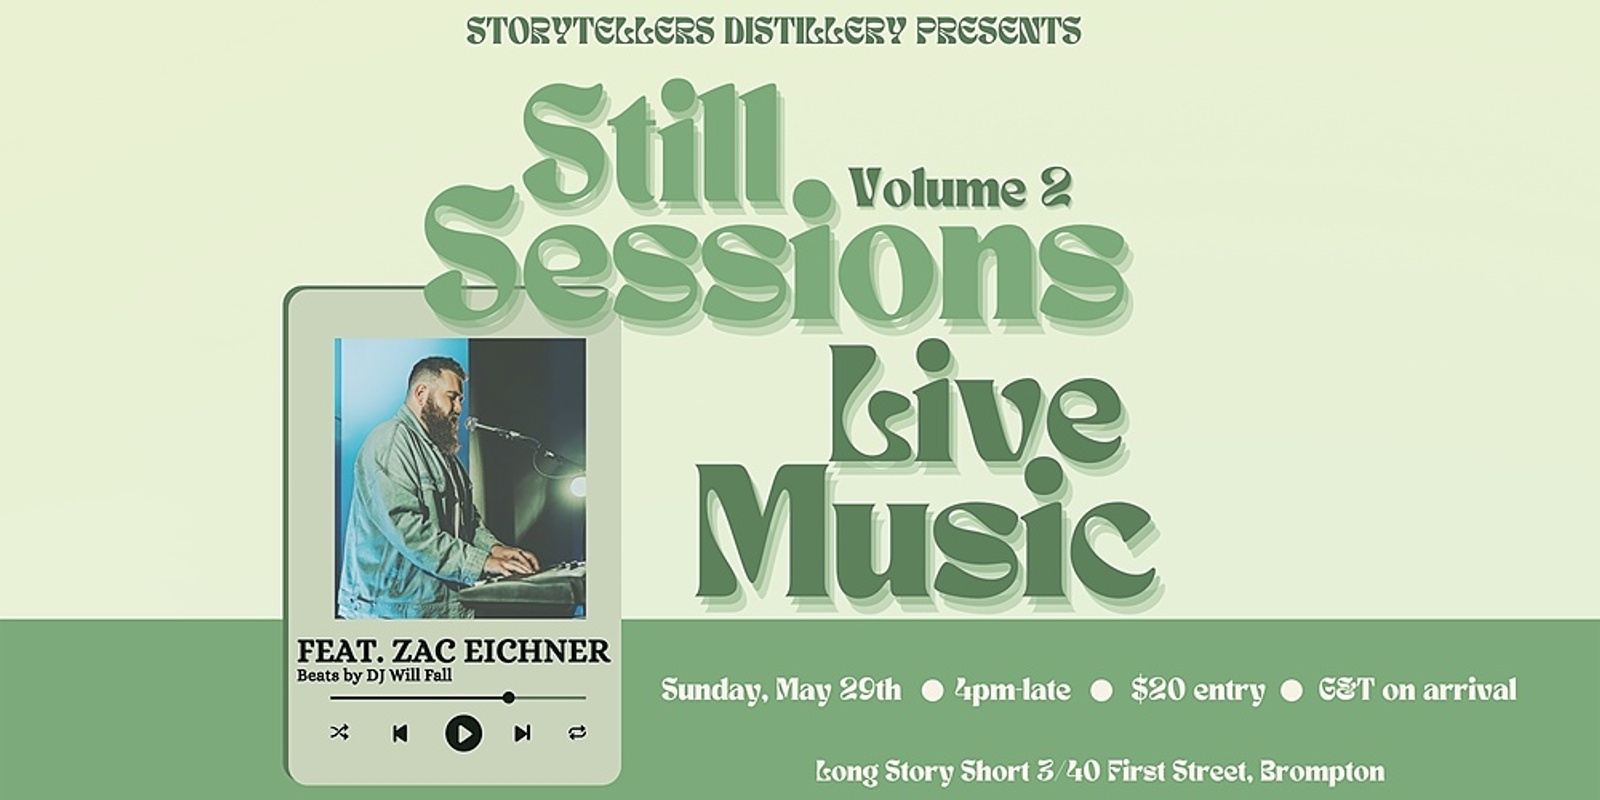 Banner image for Storytellers Distillery Presents: Still Sessions Volume 2 with ZAC EICHNER